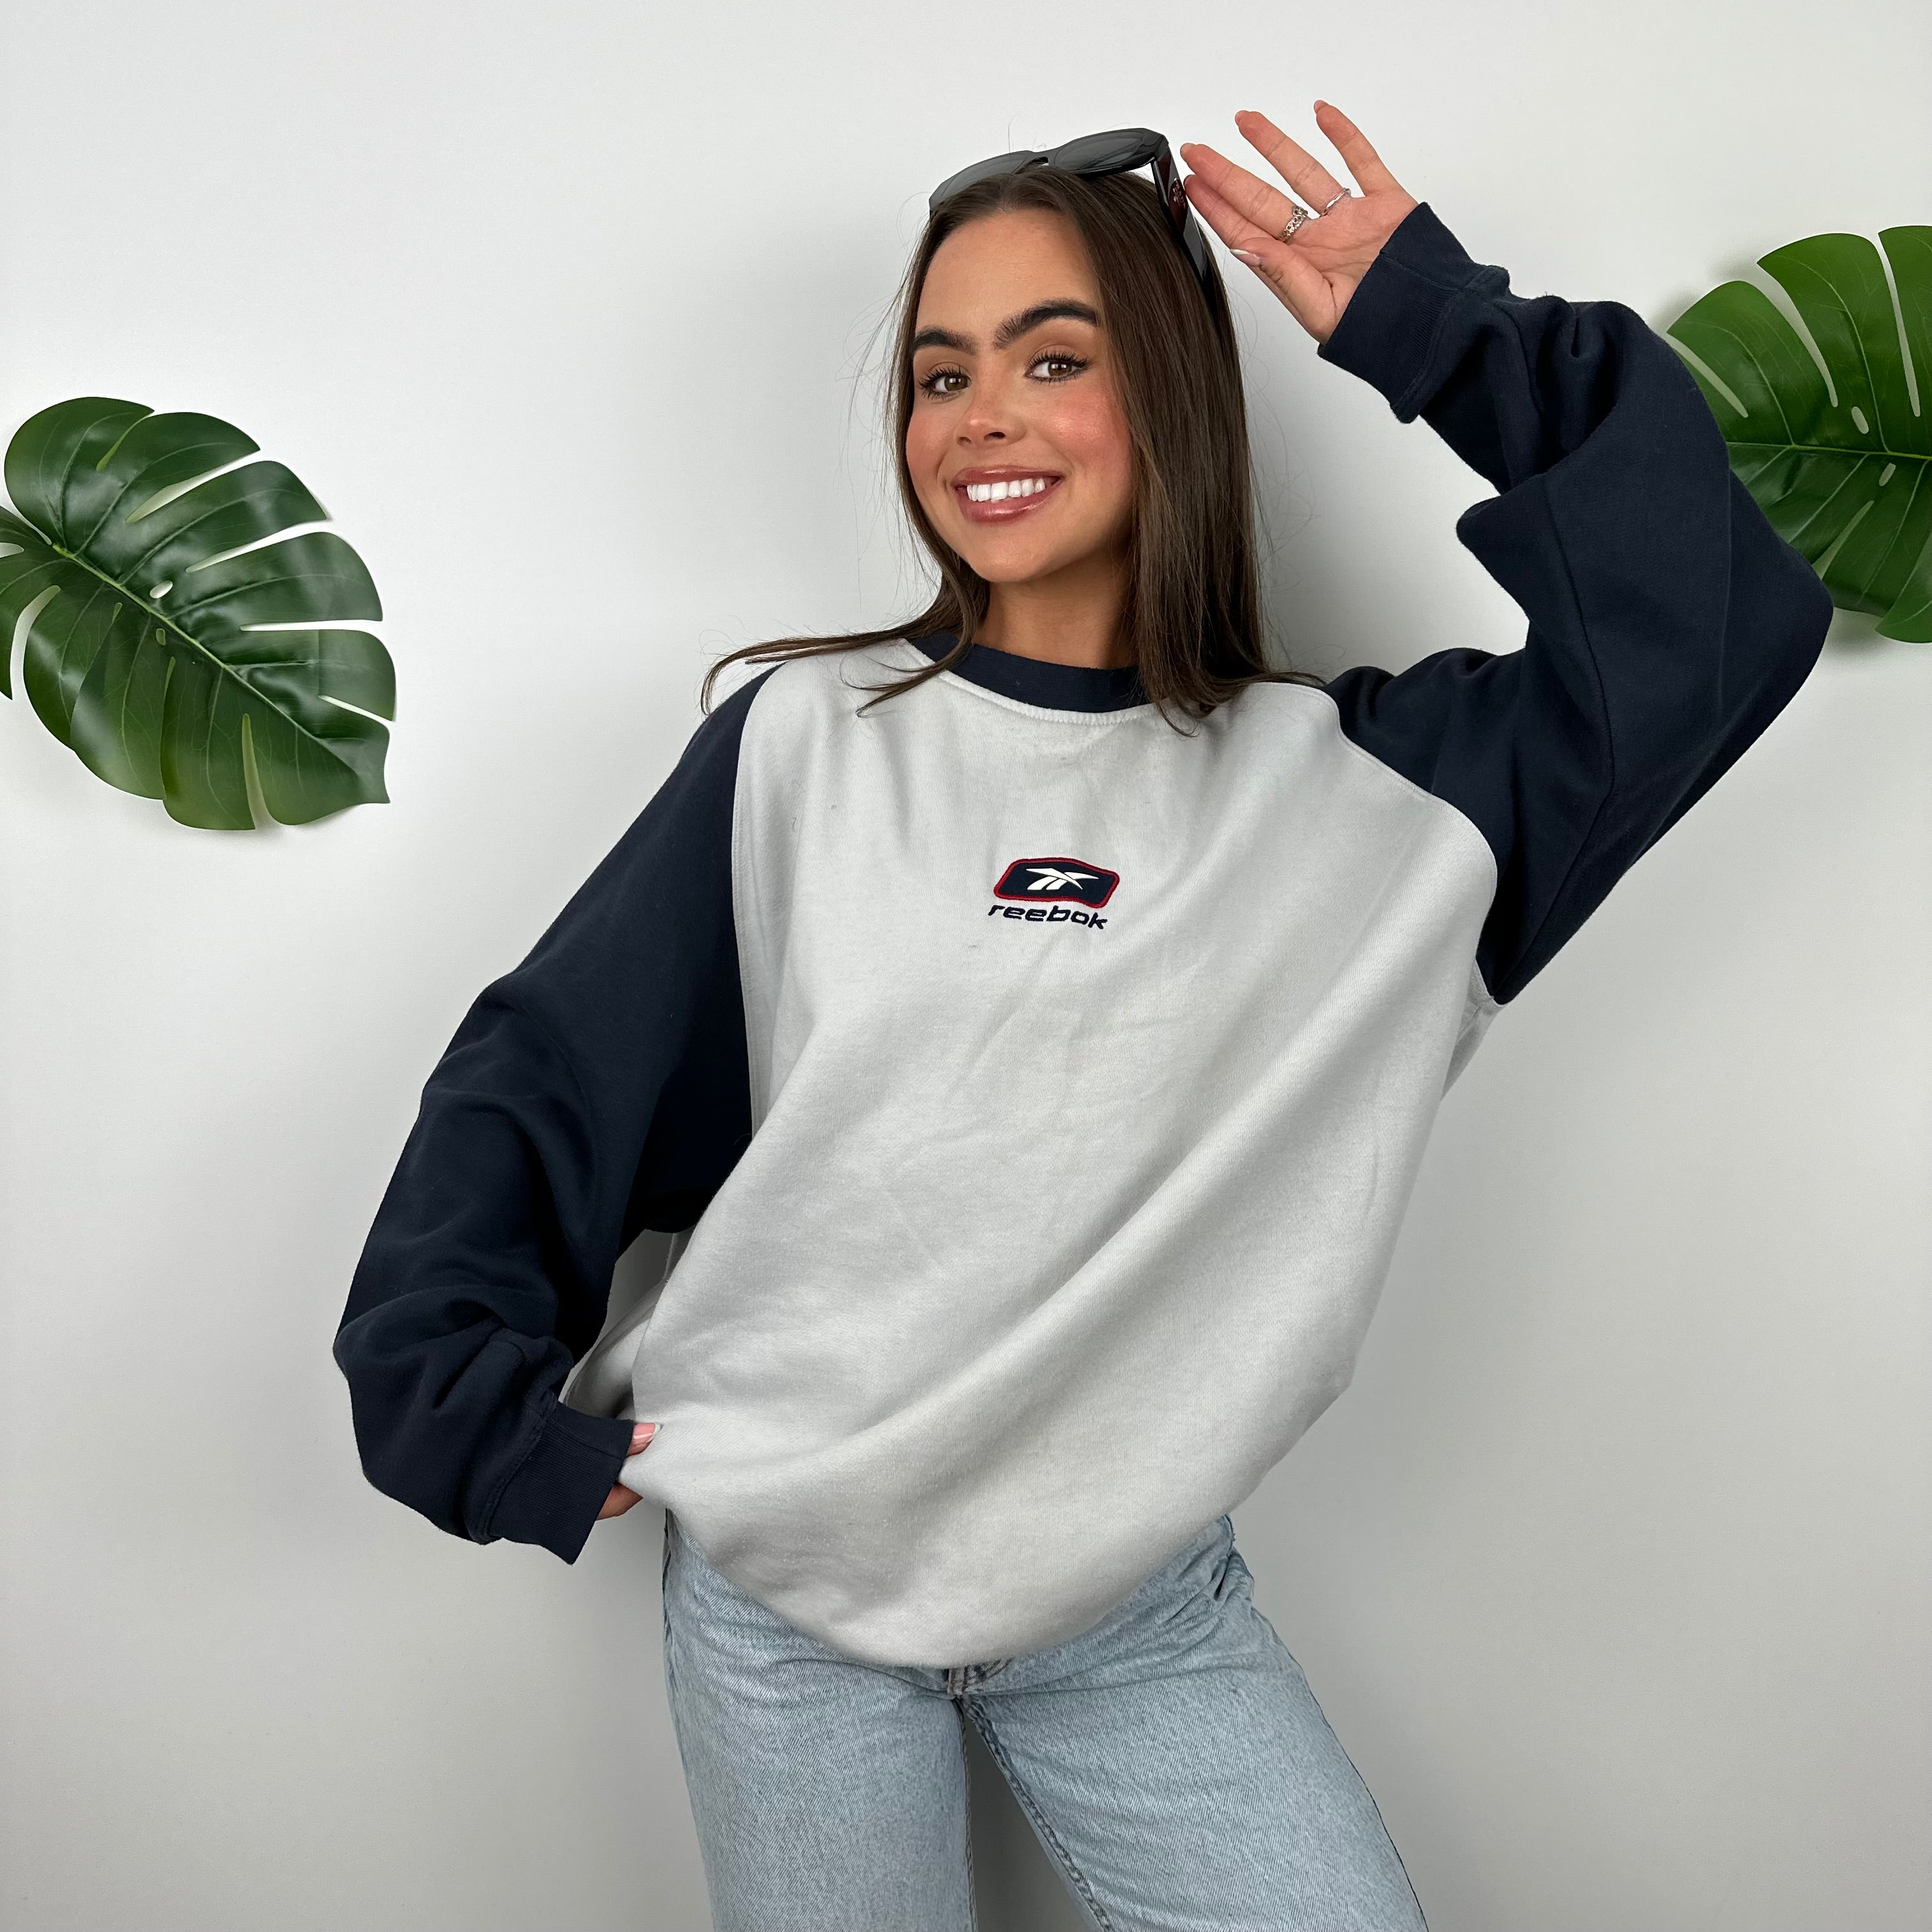 Reebok Grey & Navy Embroidered Spell Out Sweatshirt (L)